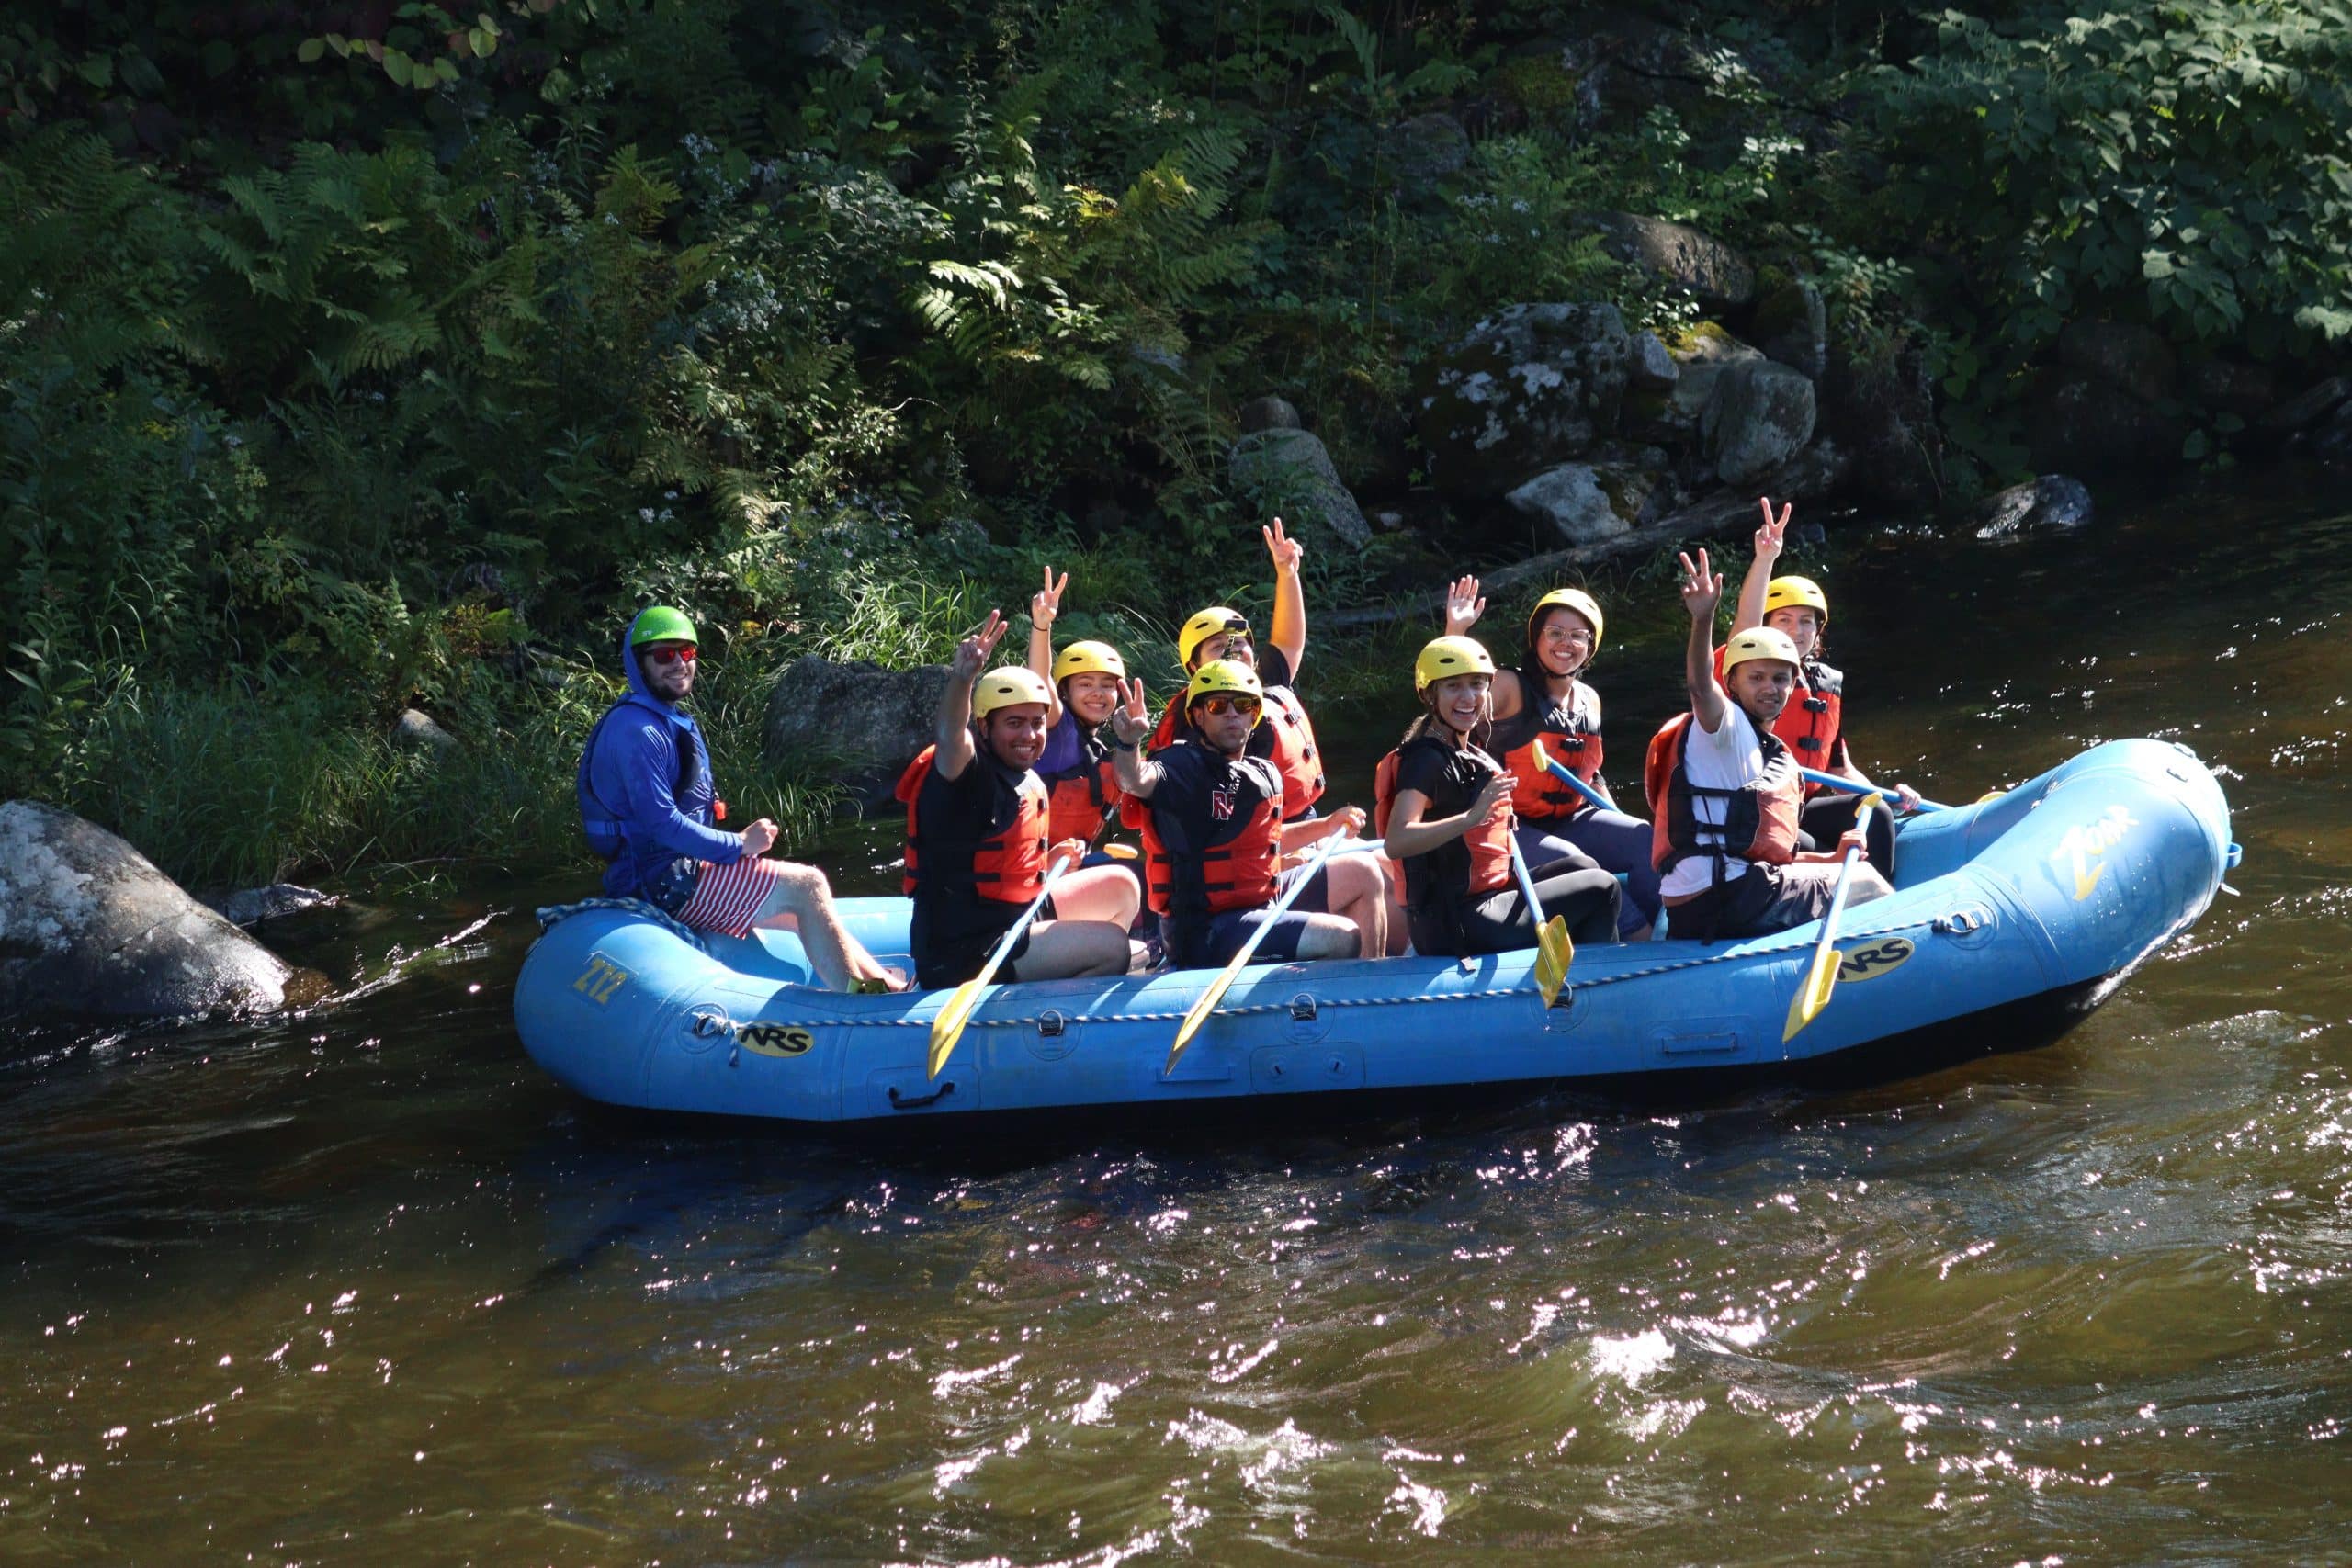 Zoar rafters waving to the camera on a peaceful section of the Deerfield River